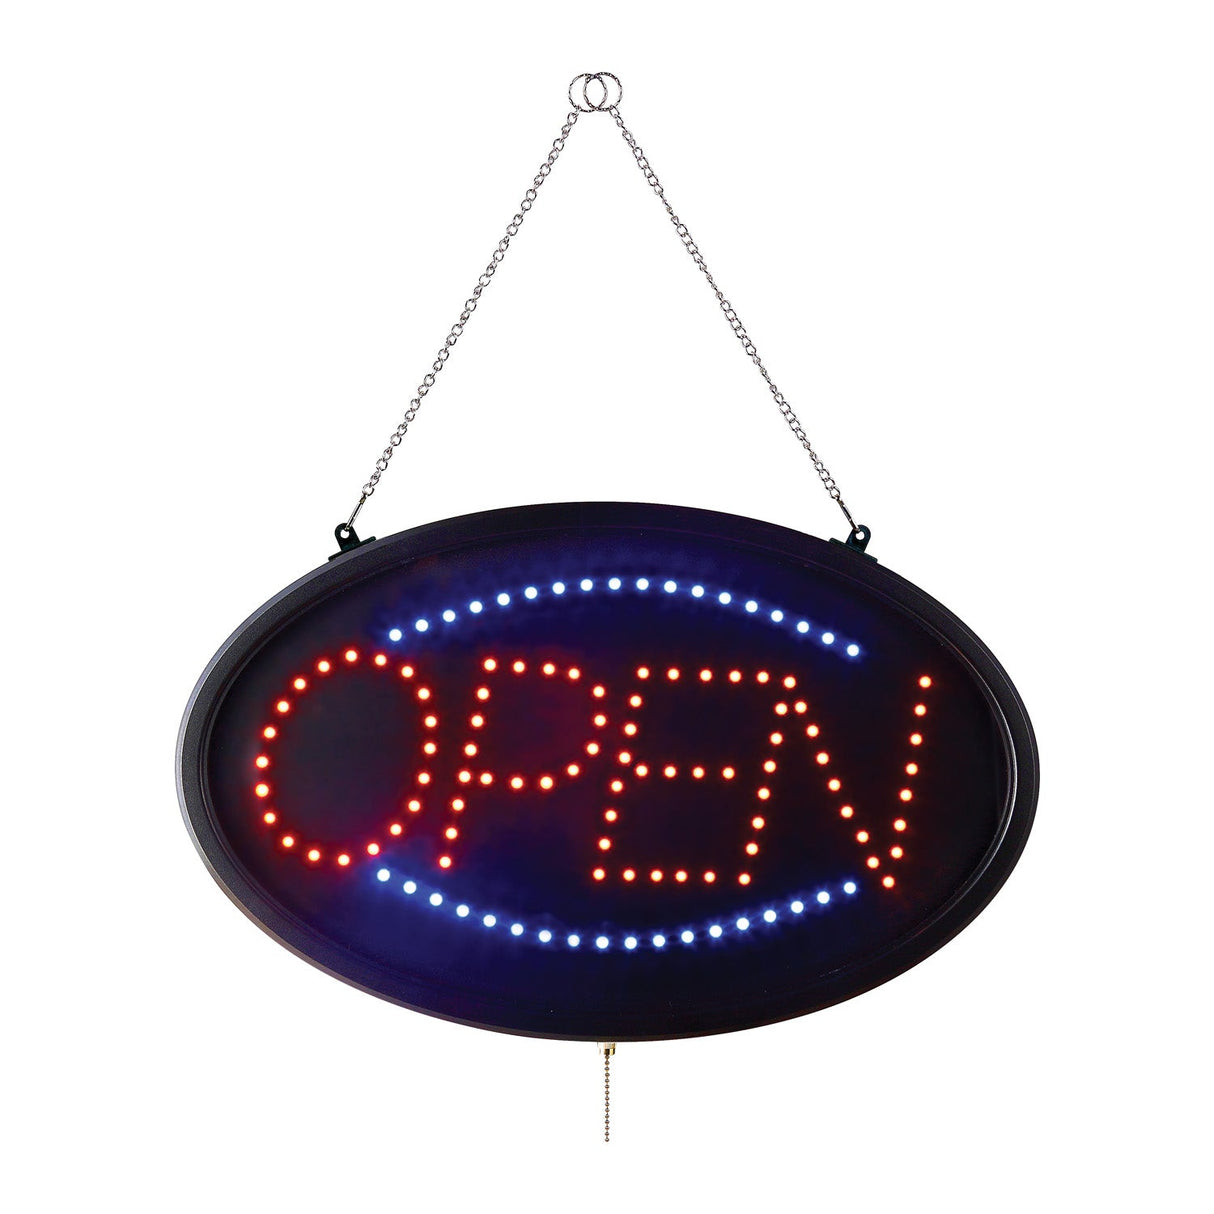 Sign LED "OPEN" Oval 3 Modes